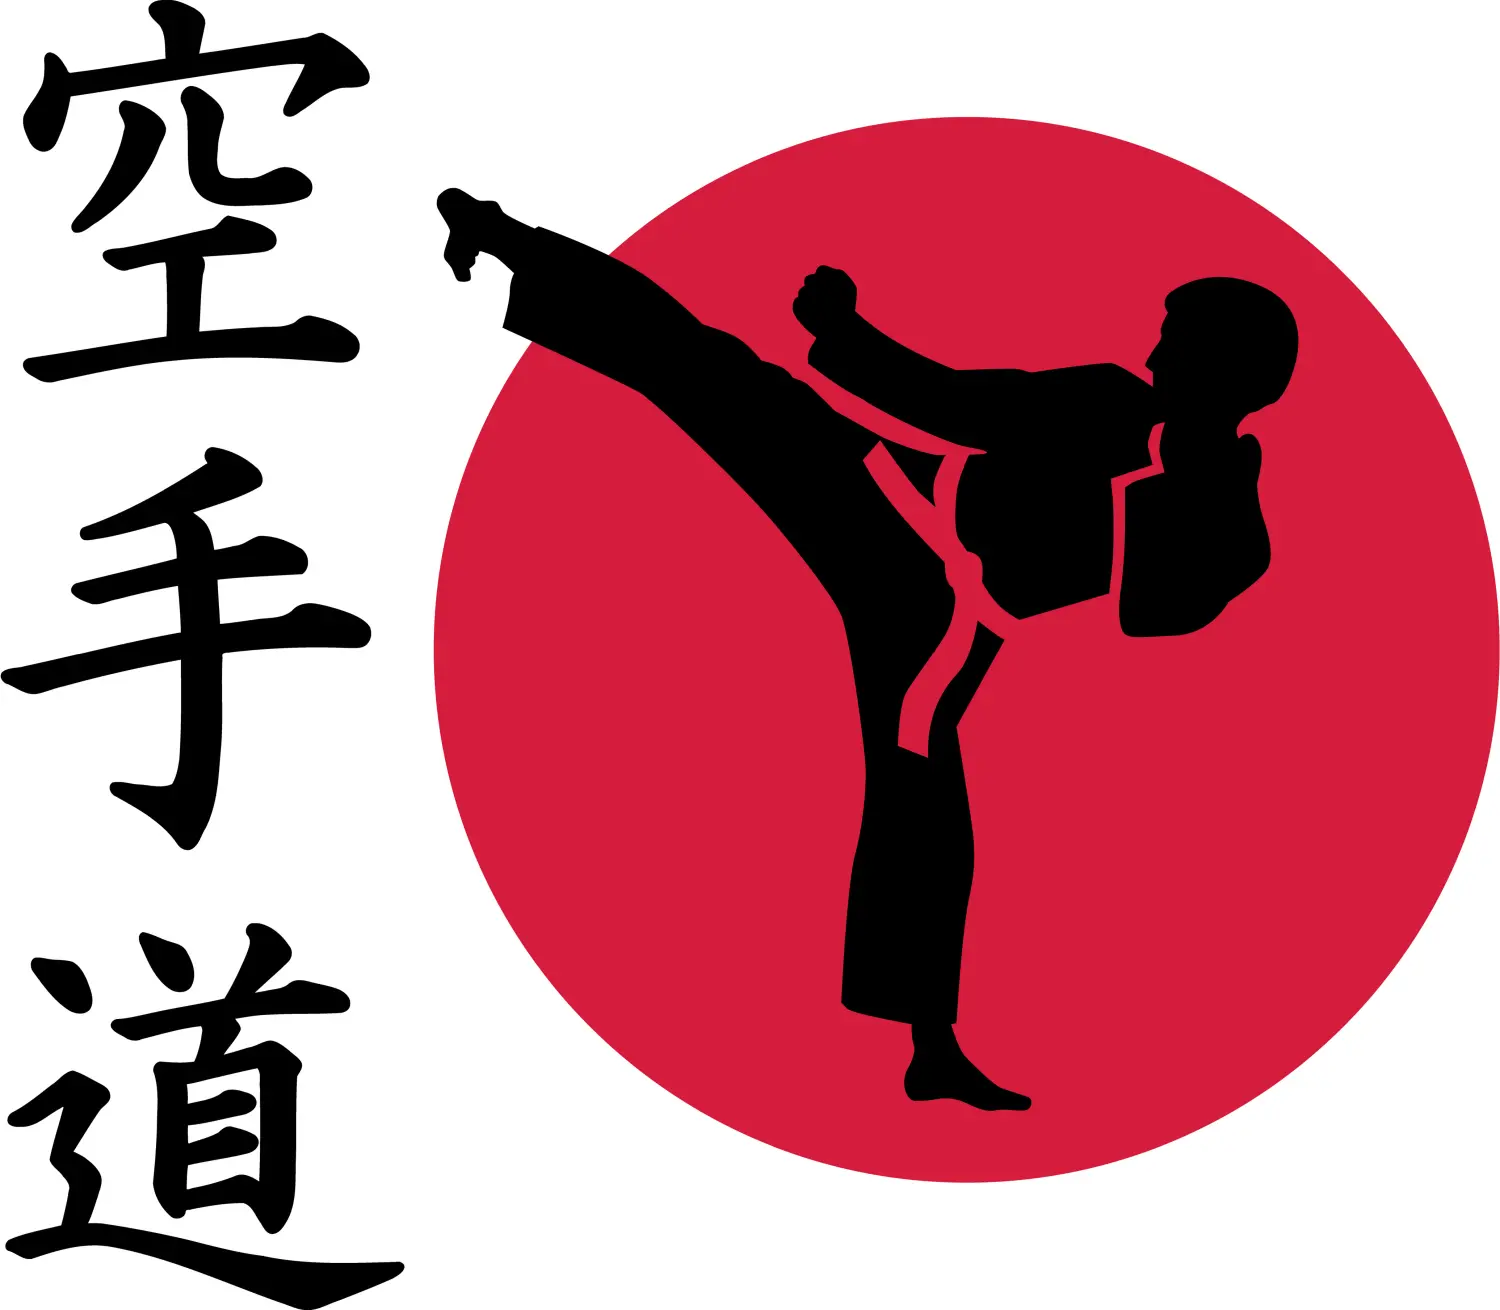 Loveless Academy of Karate & Kobudo,    FILE #:  91526226  Preview Crop  Find Similar FILE TYPE AI/EPS and JPEG CATEGORY Martial Arts and Self Defense LICENSE TYPE Standard or Extended Karate man in front of red circle and signs